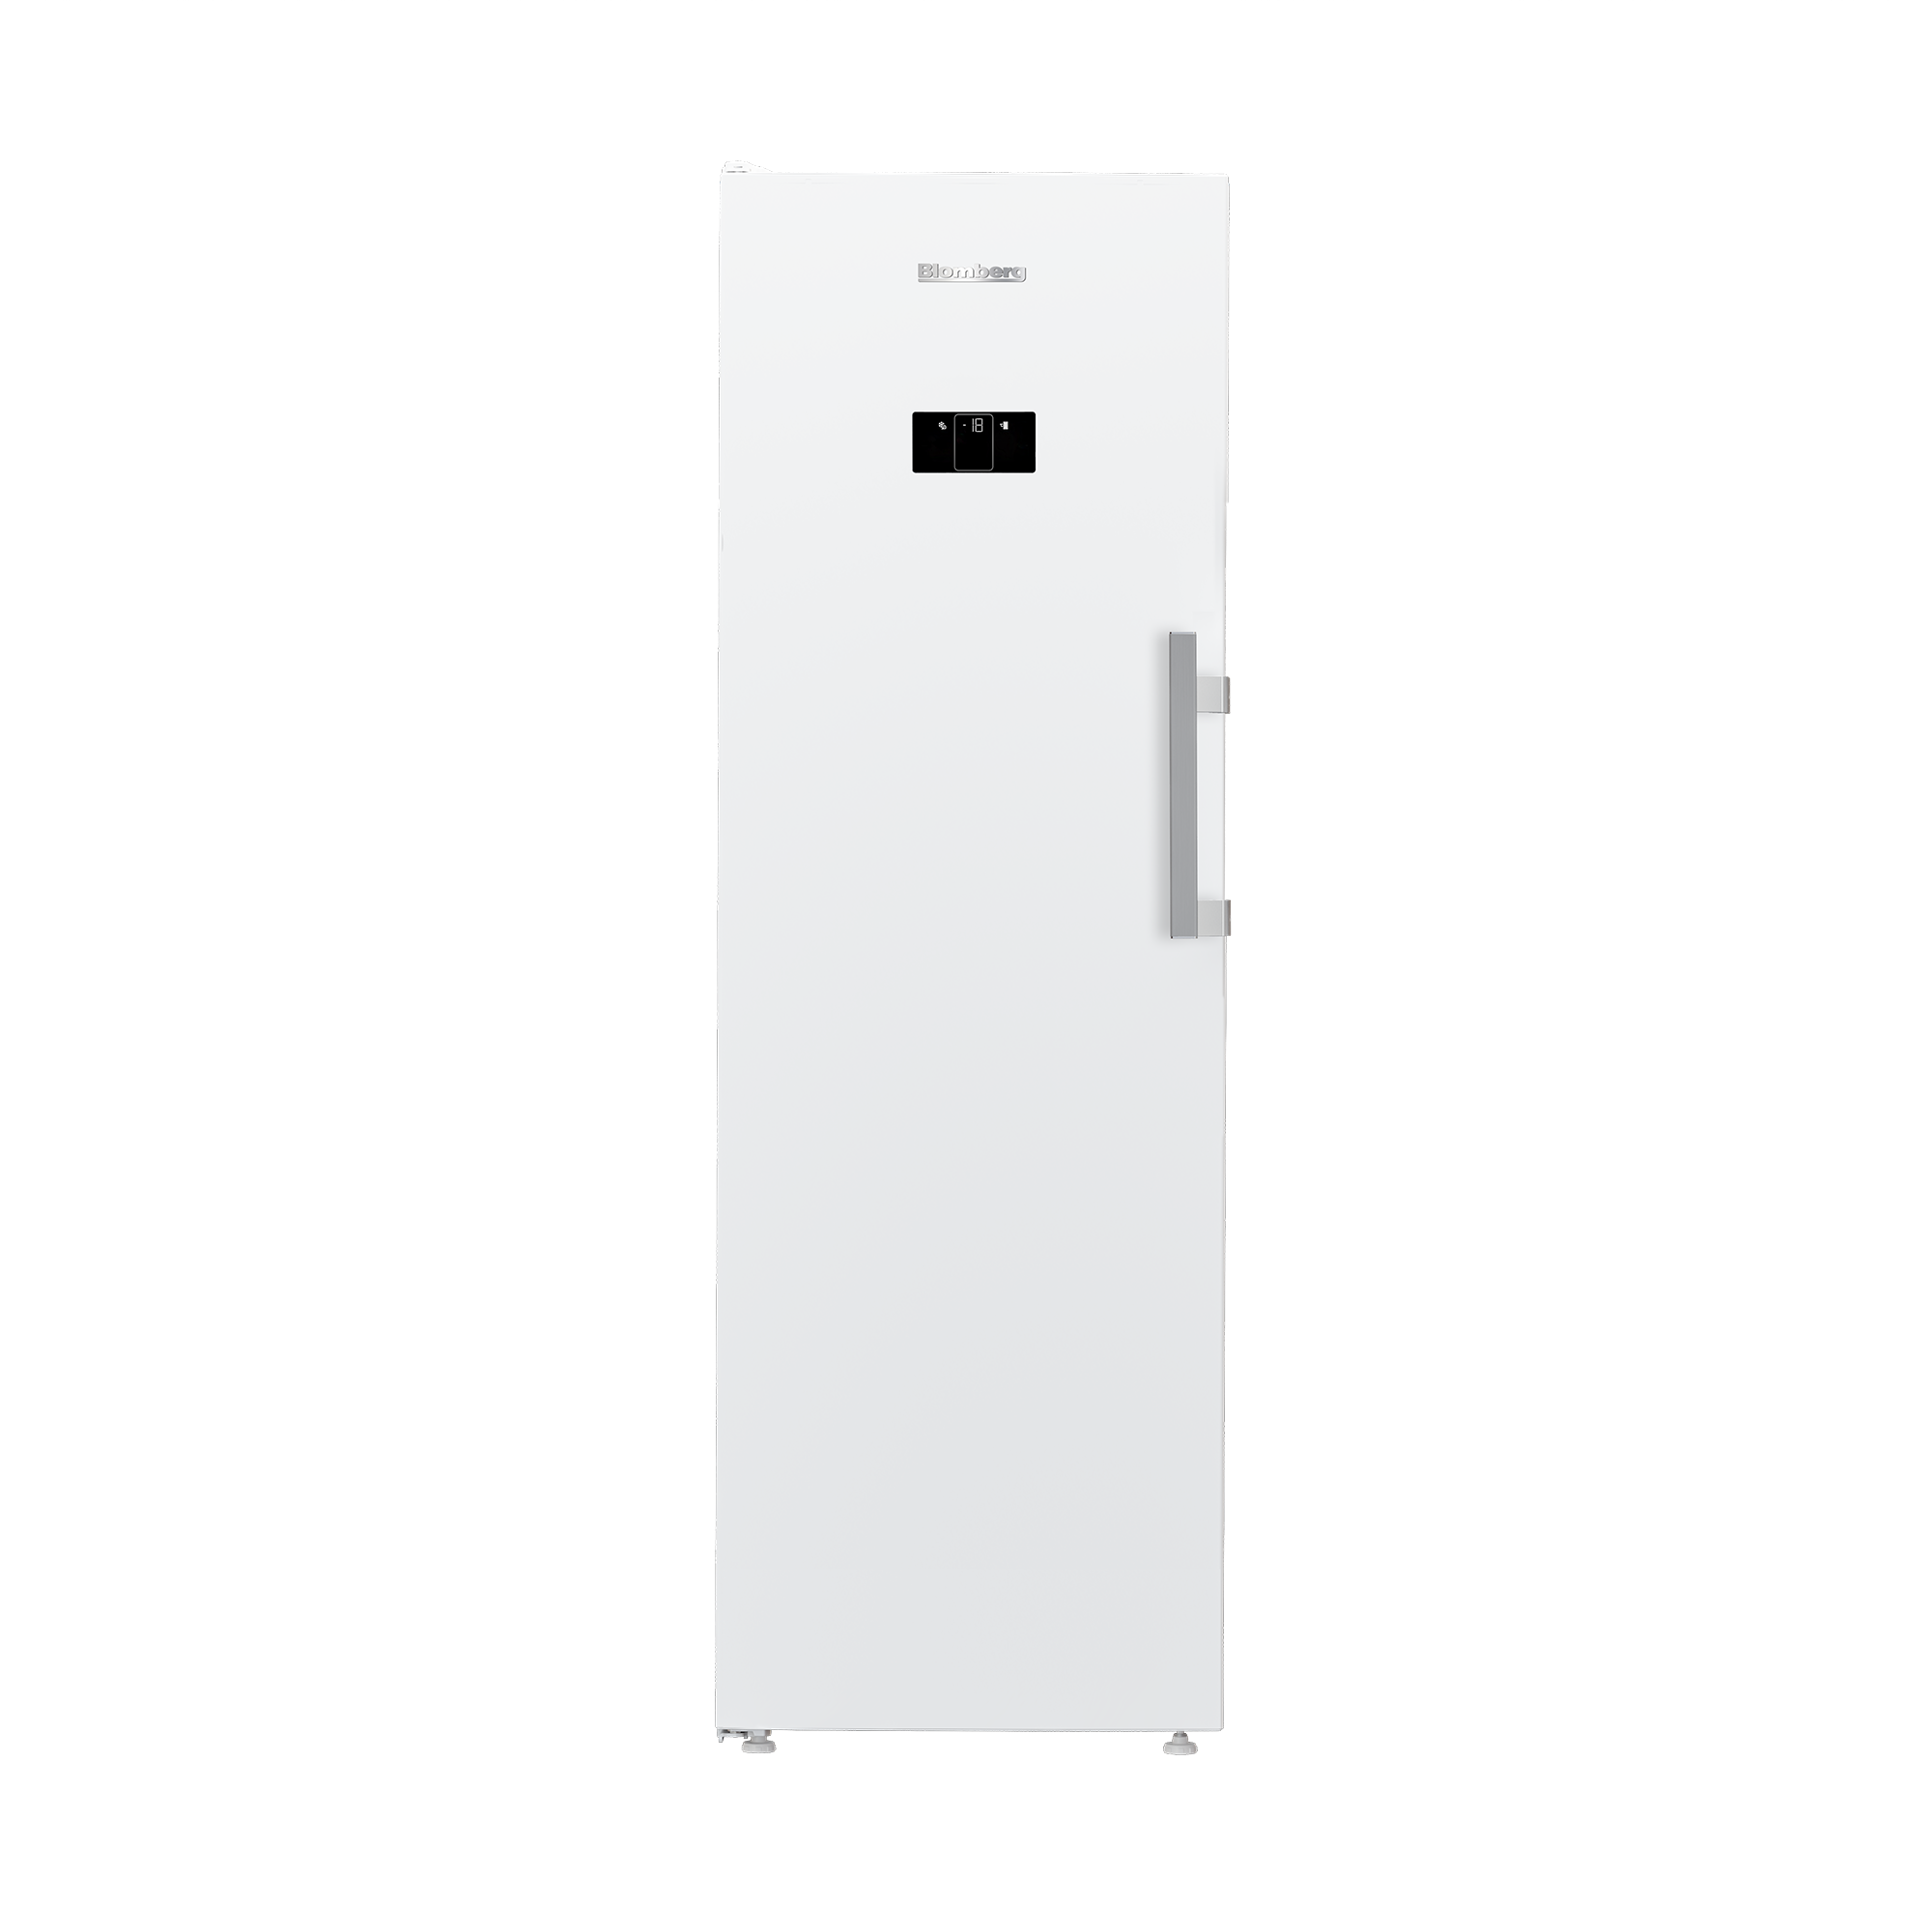 Blomberg FND568P 59.7cm Frost Free Tall Freezer - White